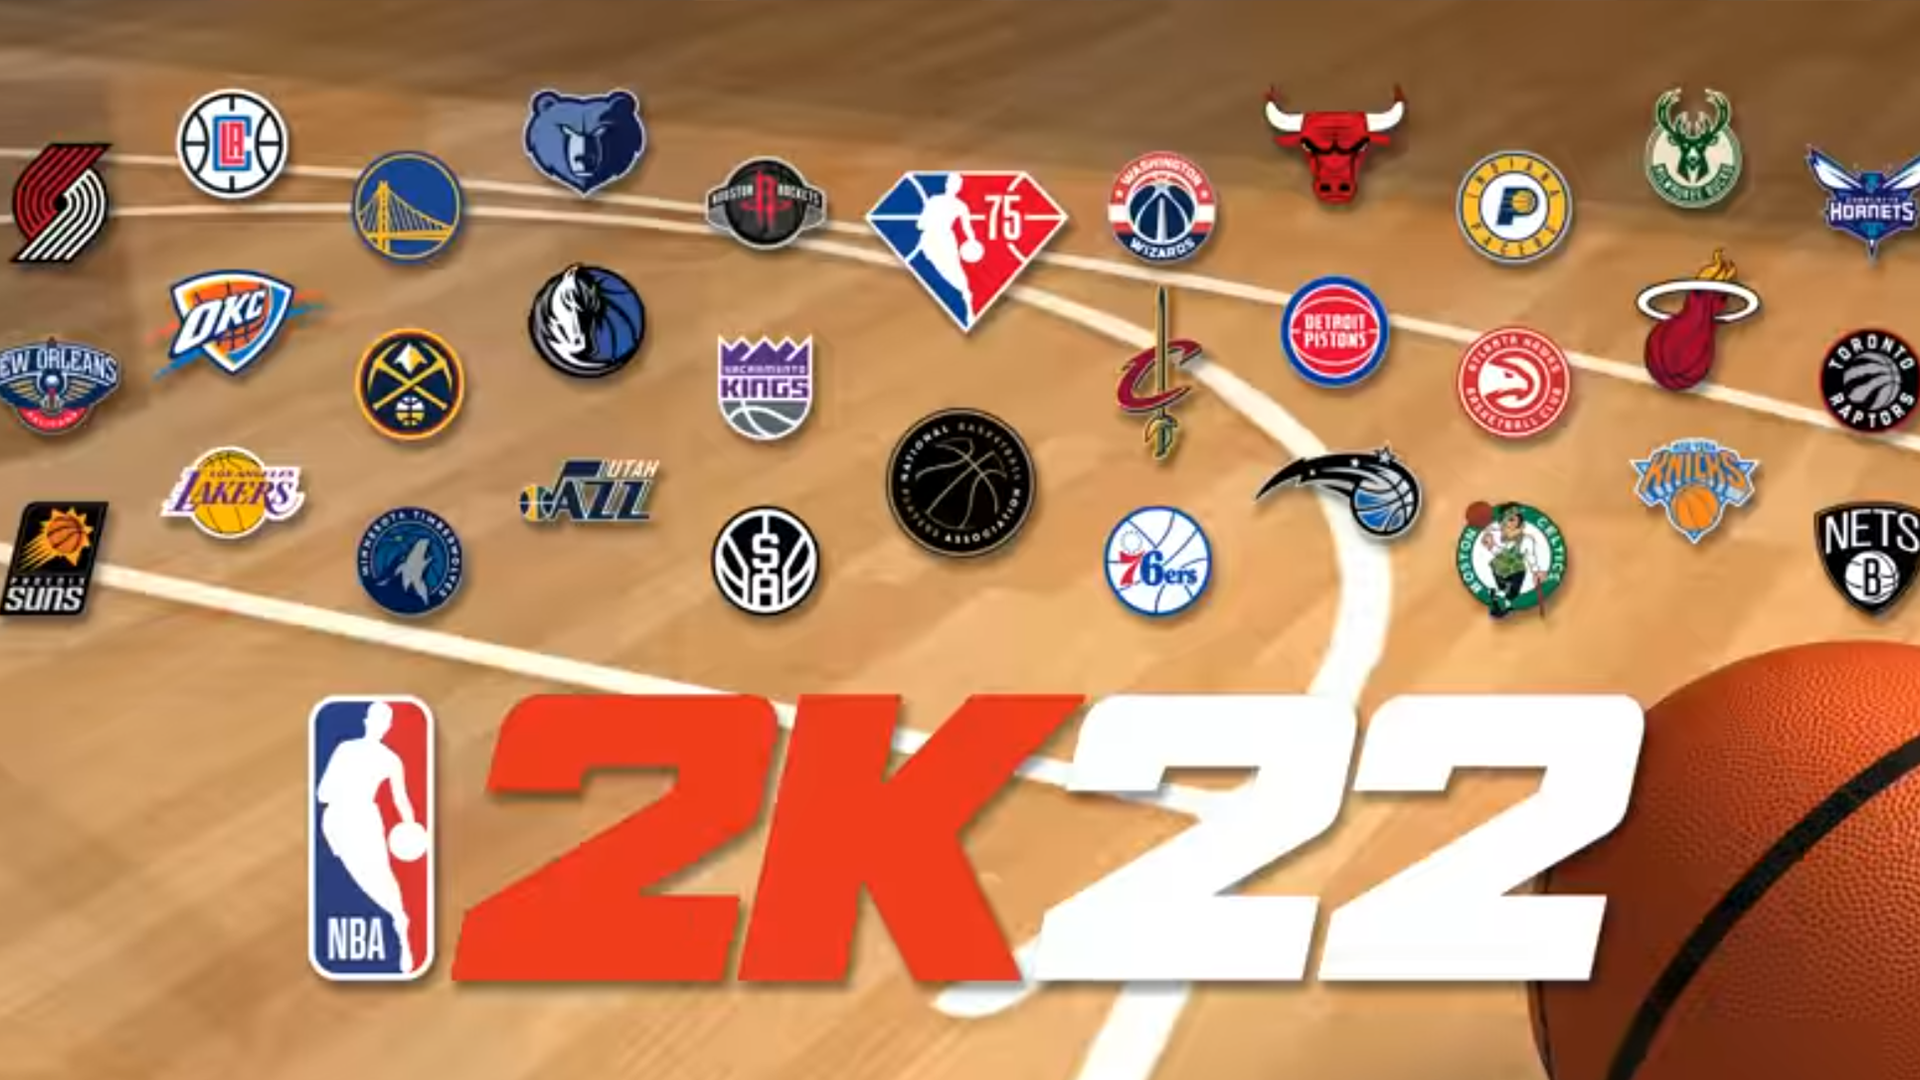 NBA 2K22 New Bootup Page with NBA Logos by 2KGOD